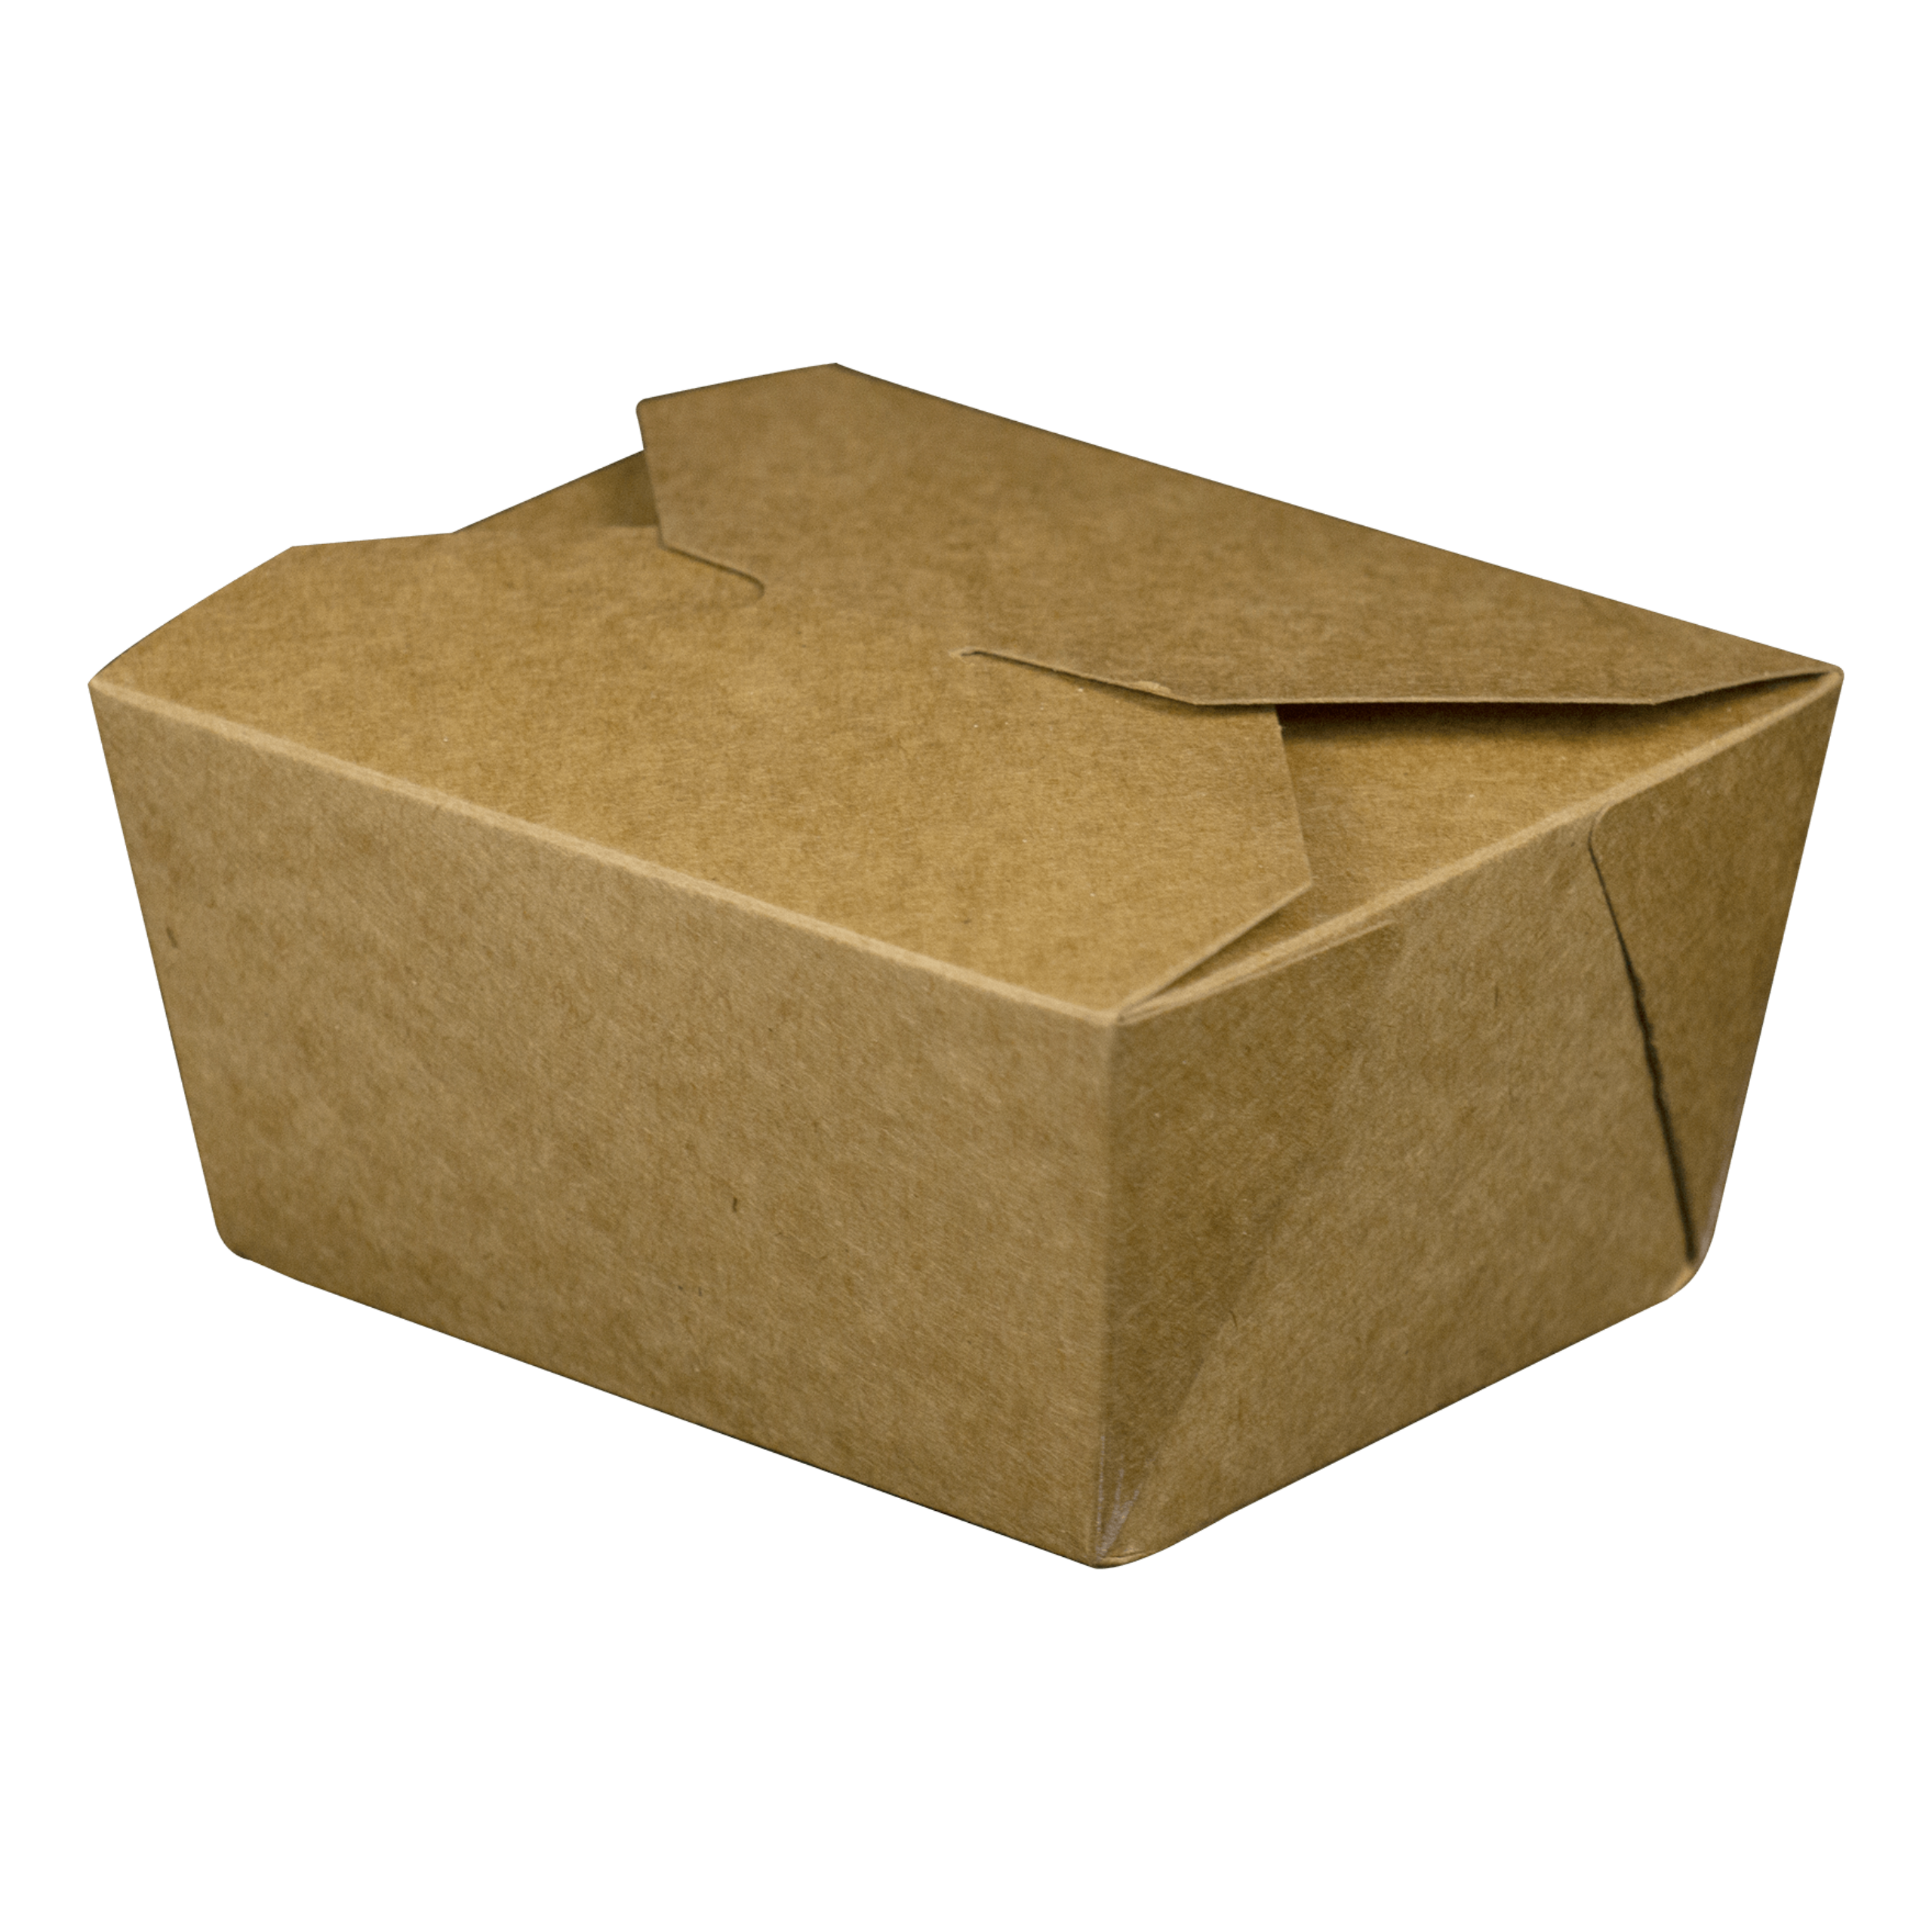 Bionature 19055 - #1 Take-Out Box - Case of 450